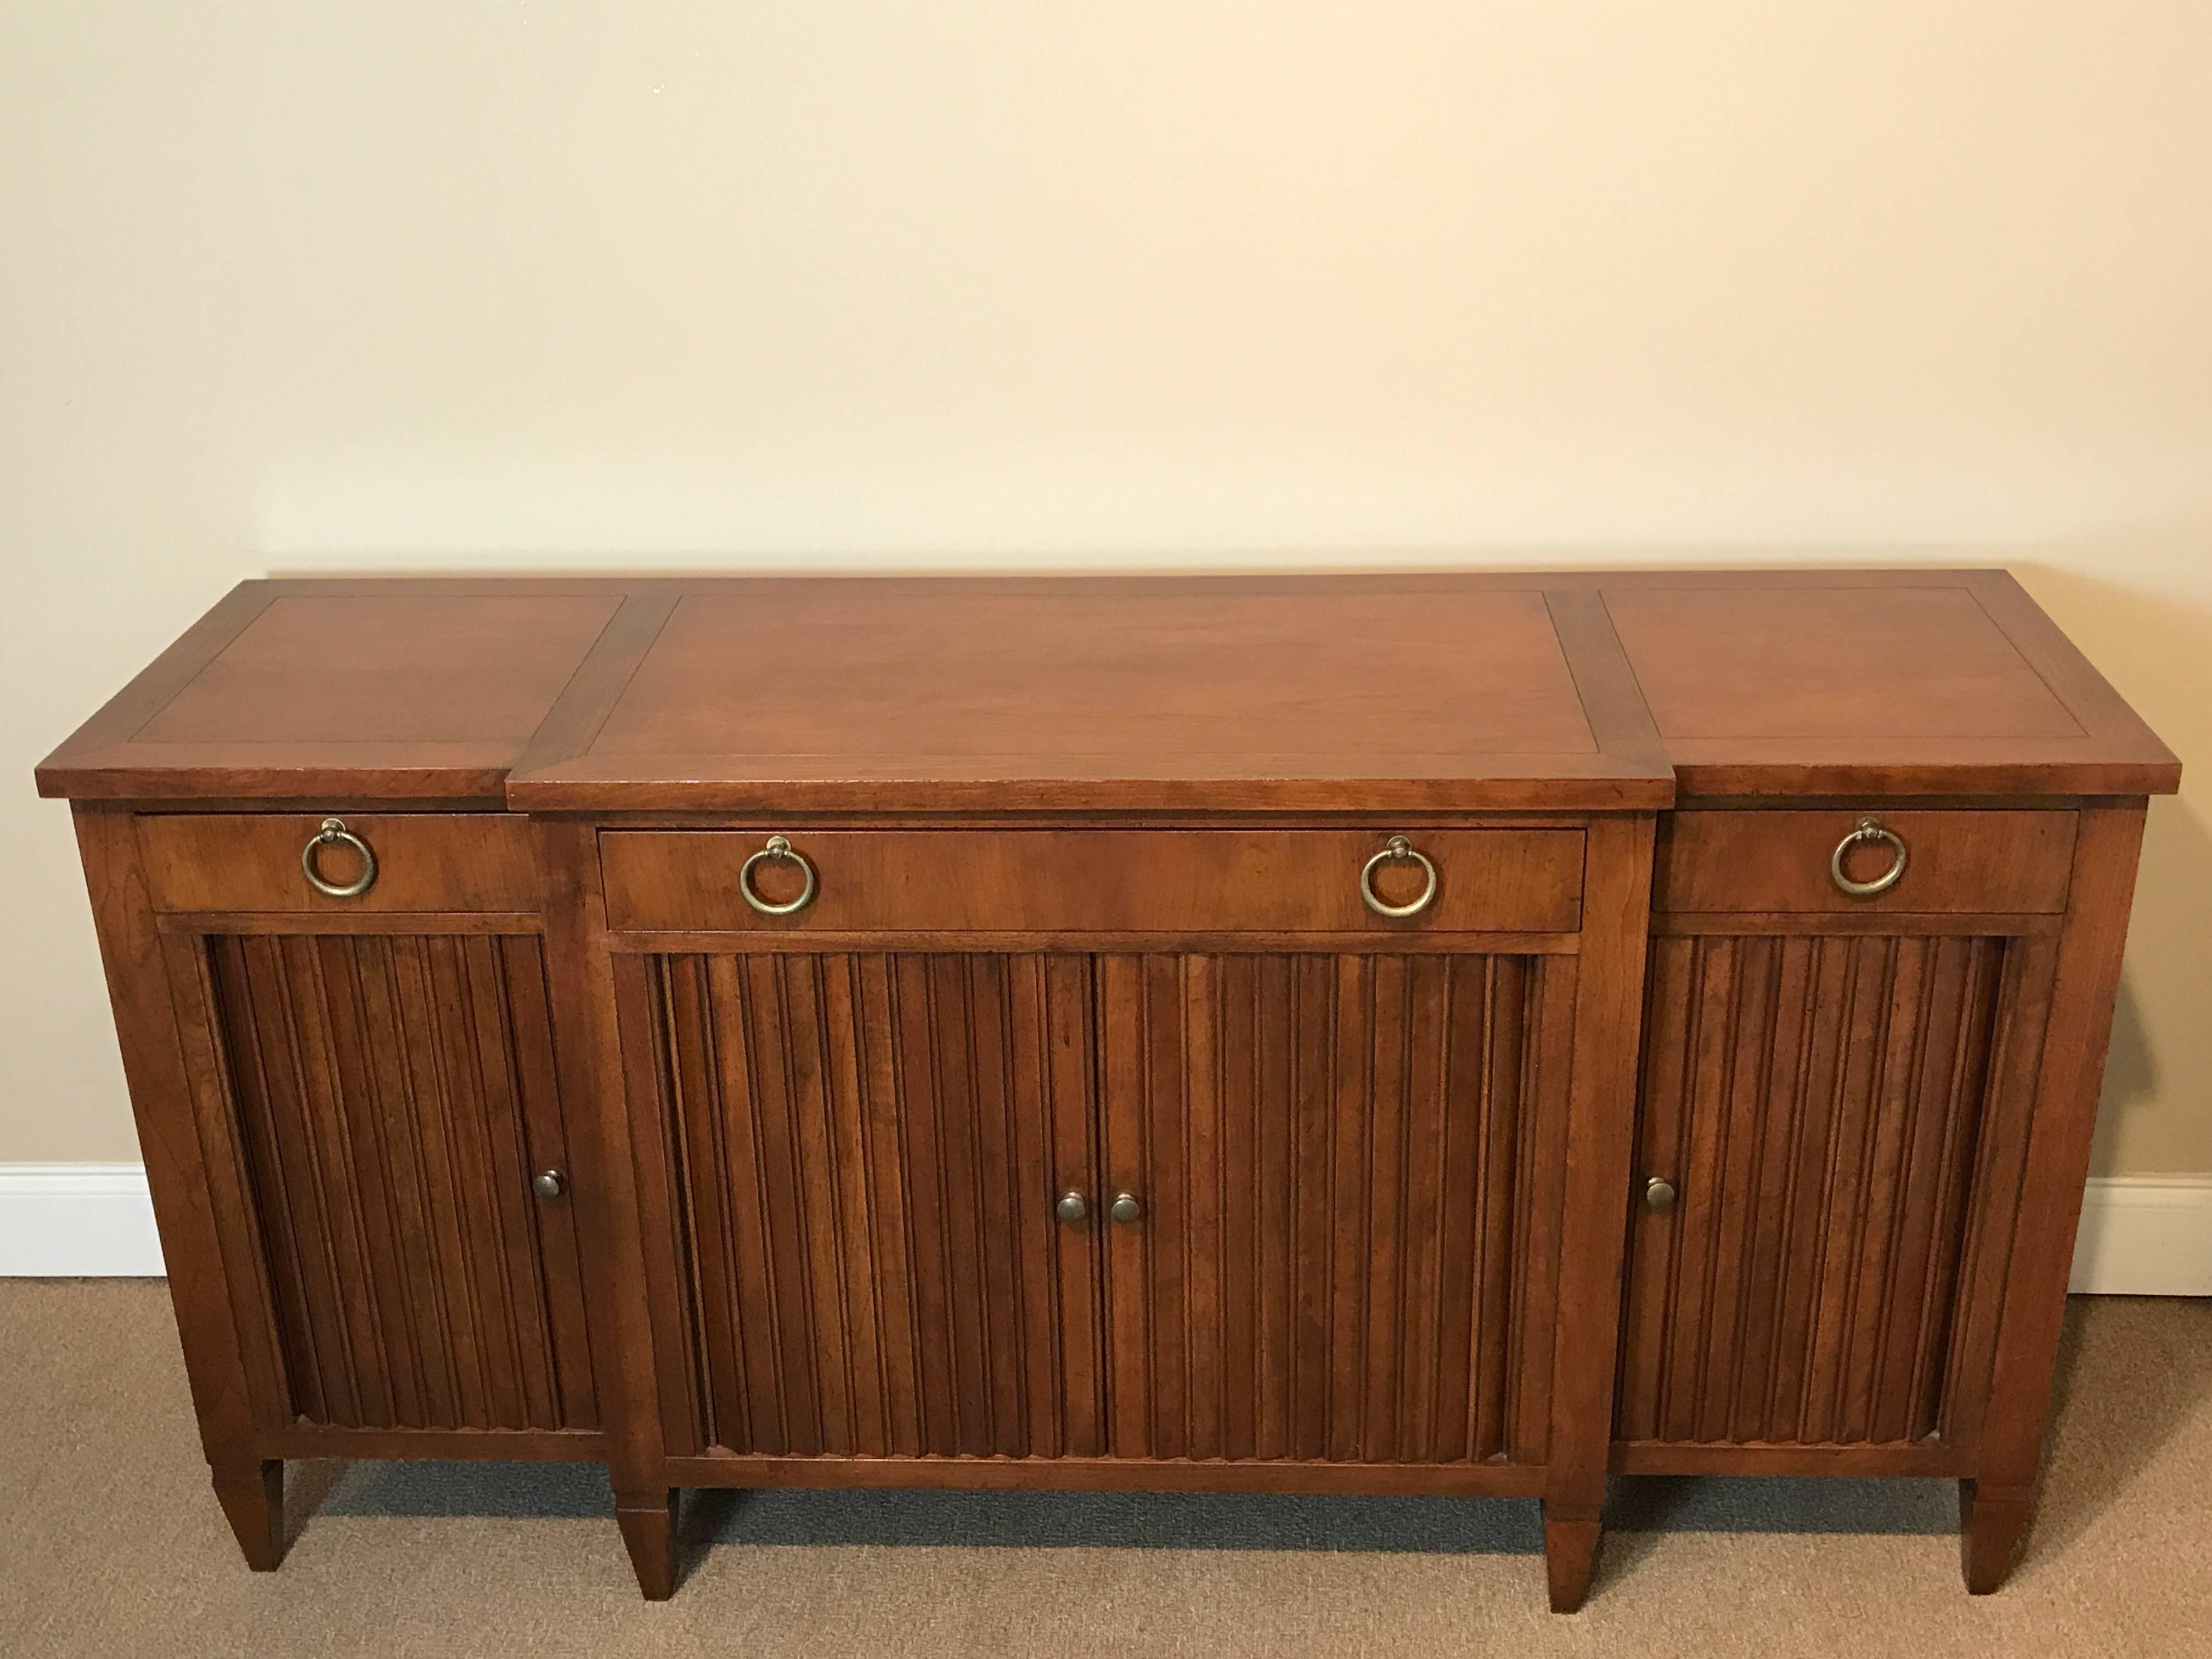 T.H. Robsjohn-Gibbings style sideboard by Baker, fitted with three drawers with ring handles, and three lower tambour doors
The drawers measure 12